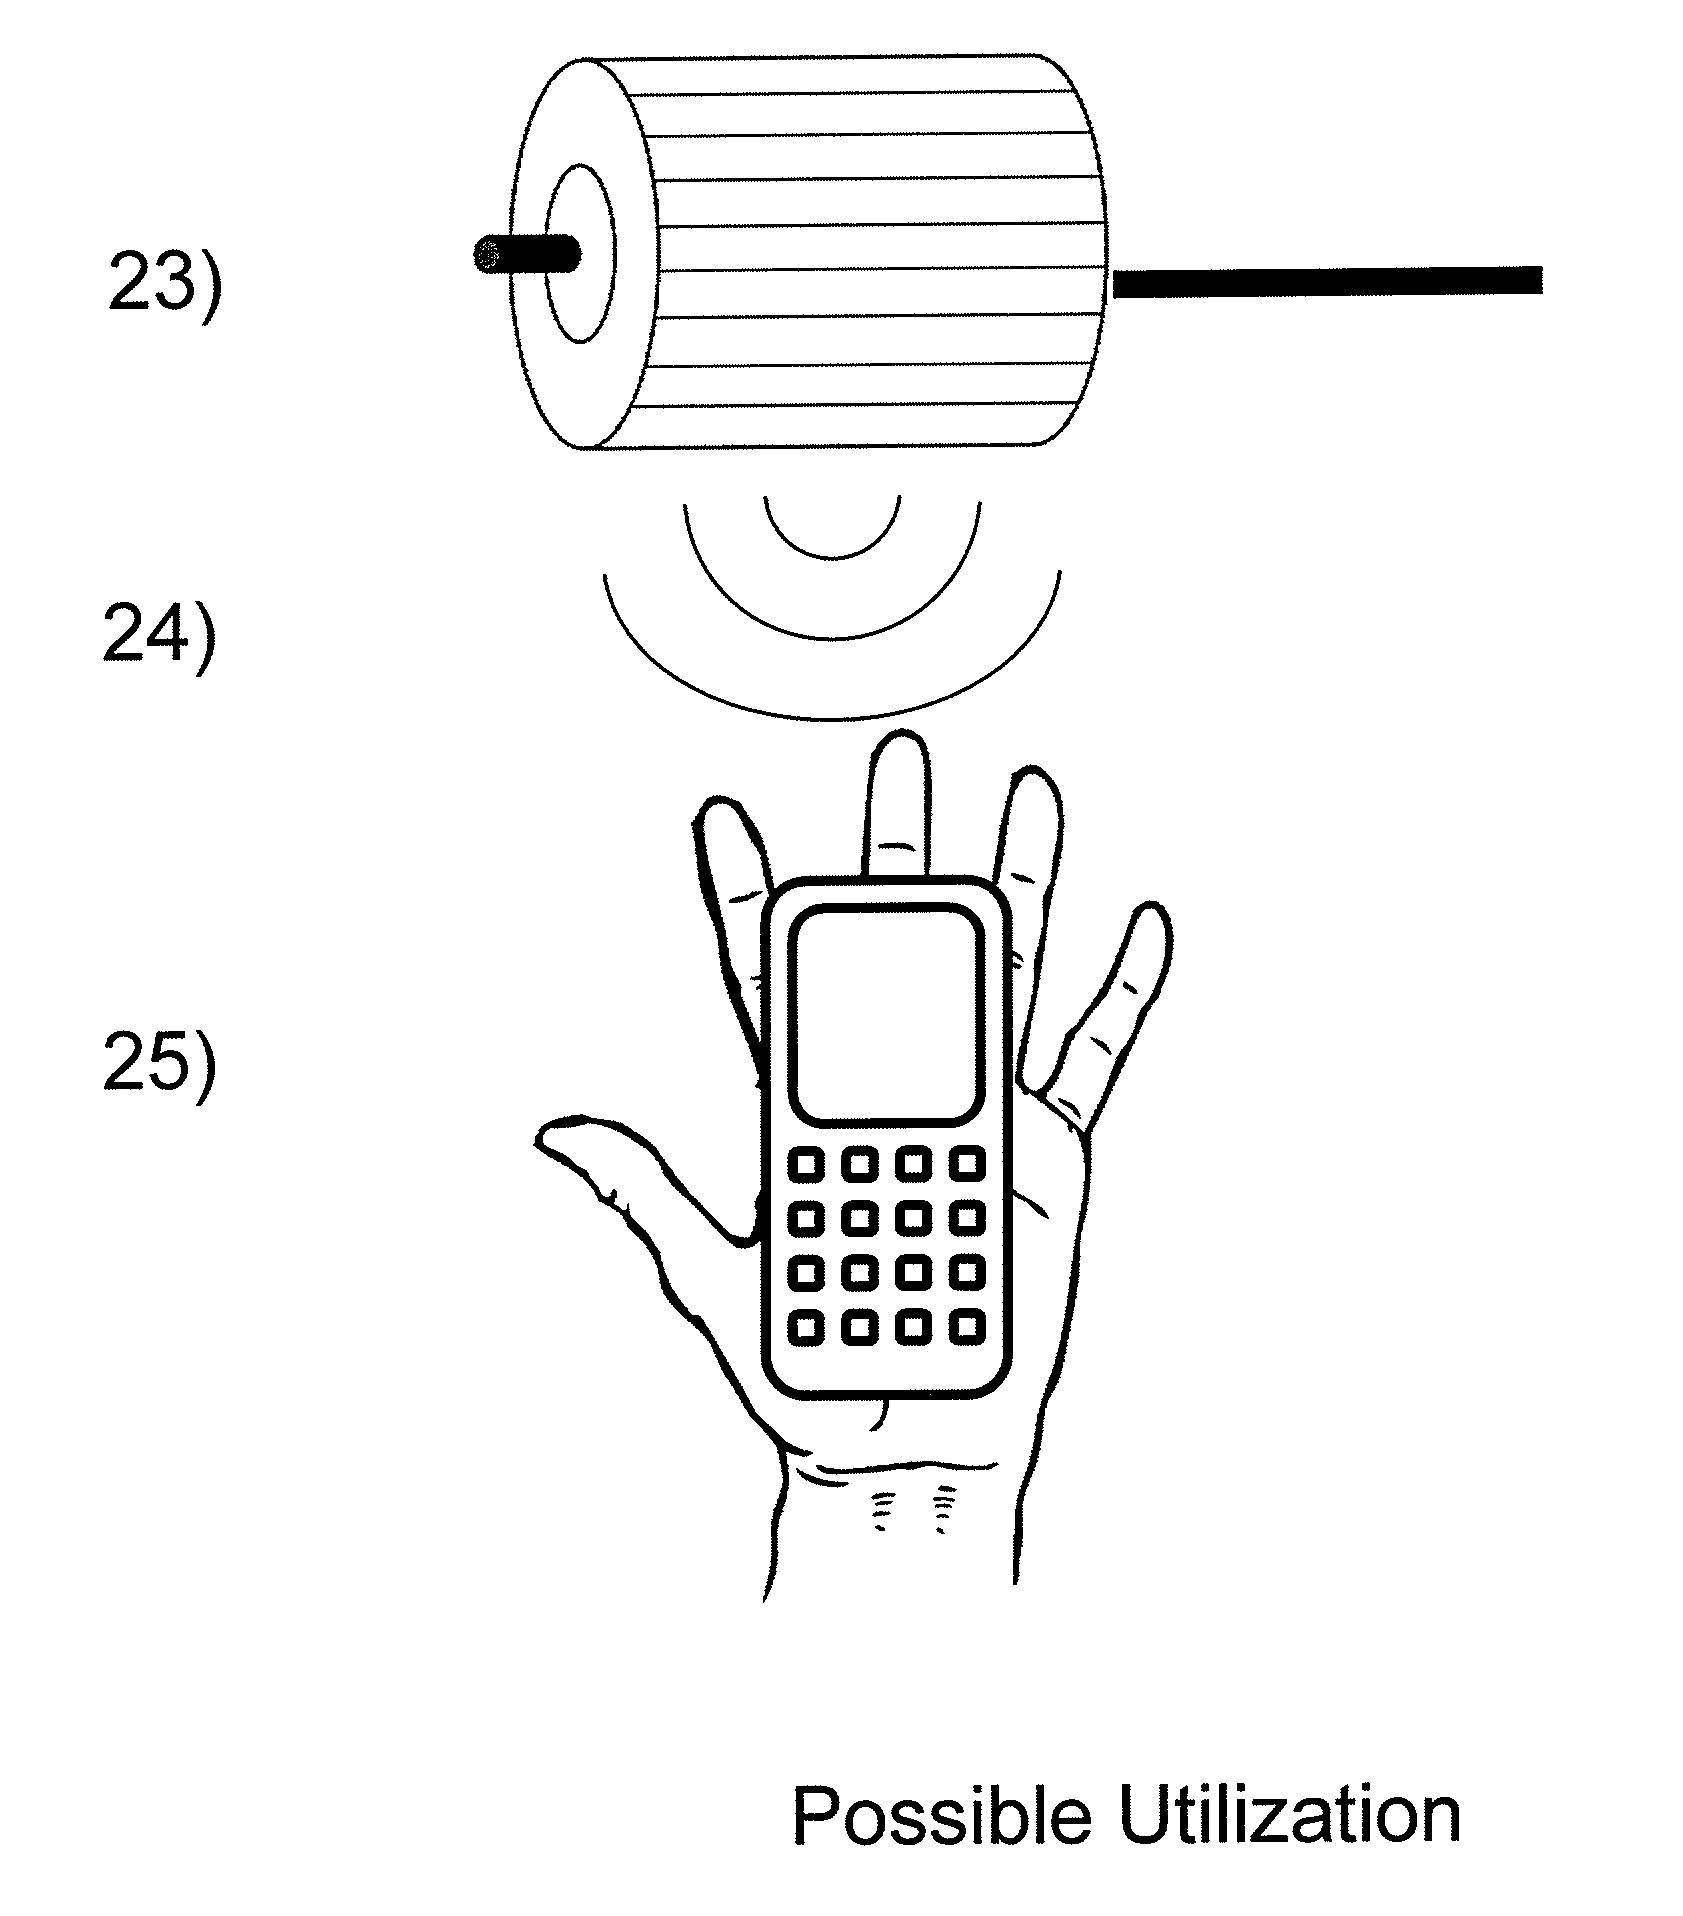 Advance manufacturing monitoring and diagnostic tool